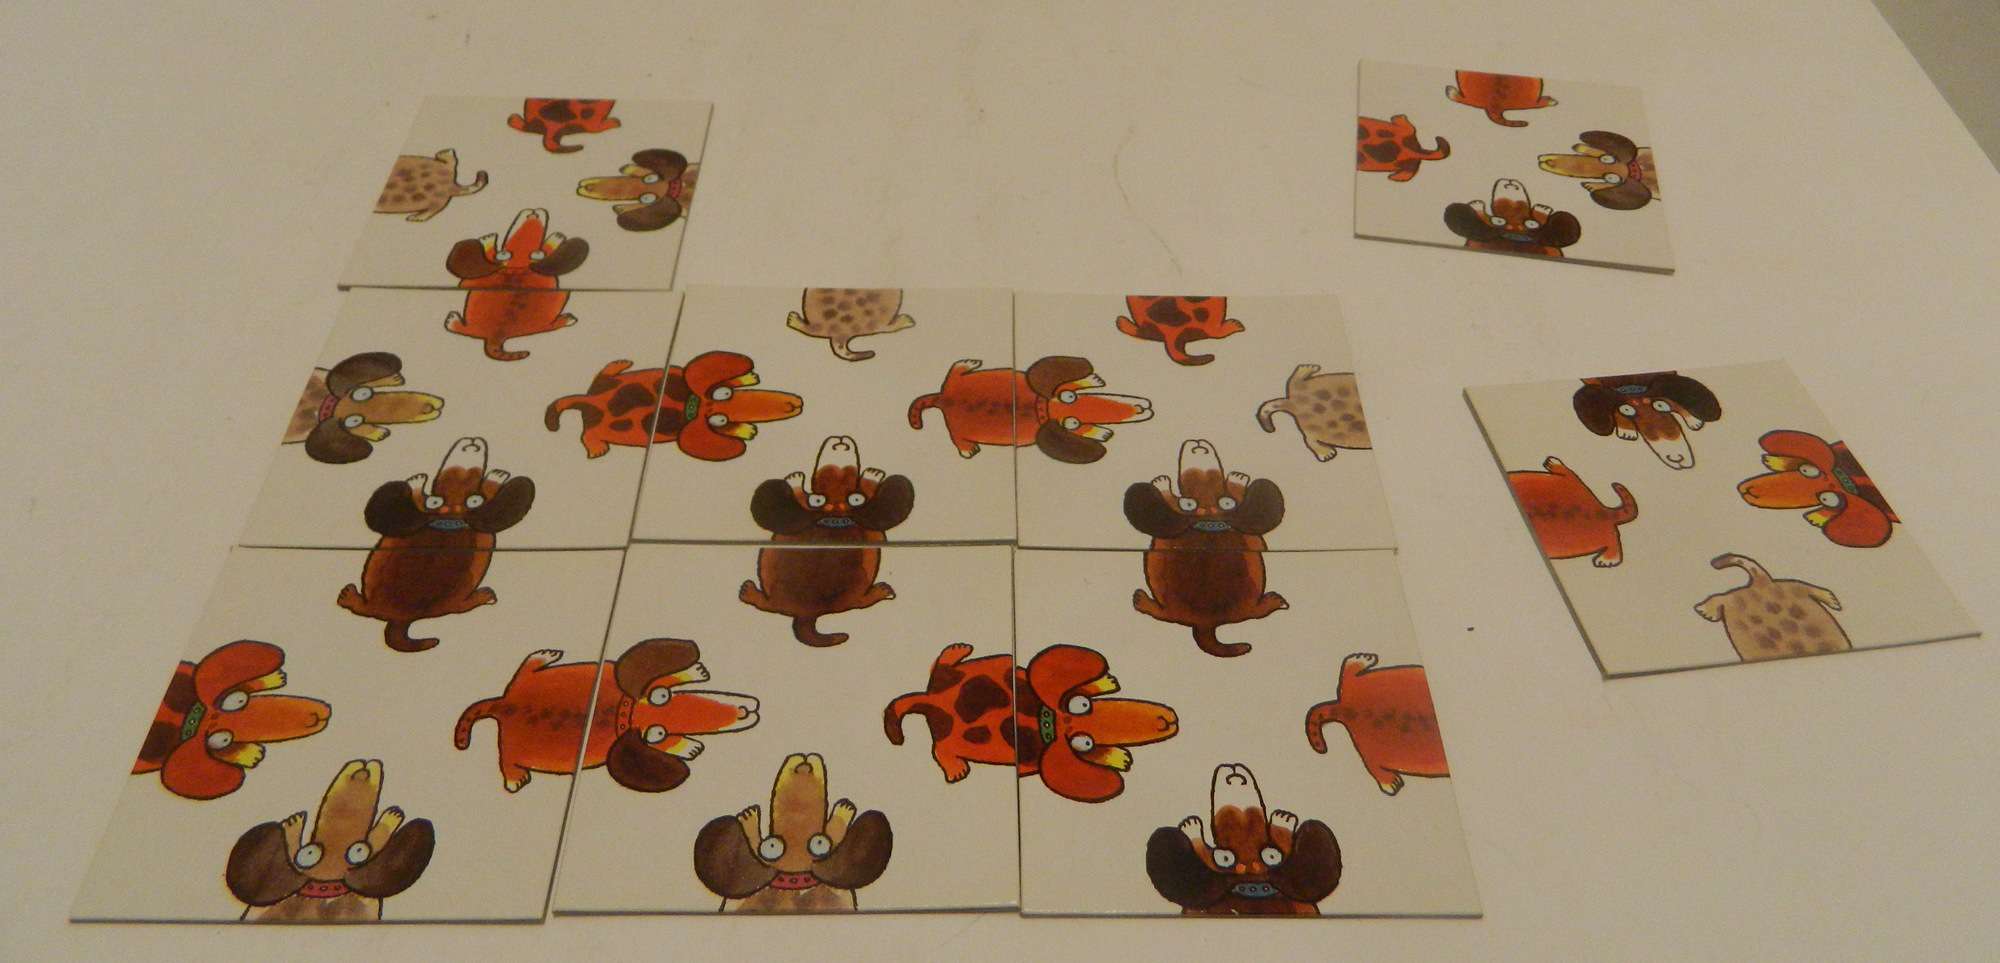 Vintage 1980, The Crazy Dog Collectible Puzzle Game by Price Stern Sloan.  Arrange the 9 cards in such a way that the heads and tails of each